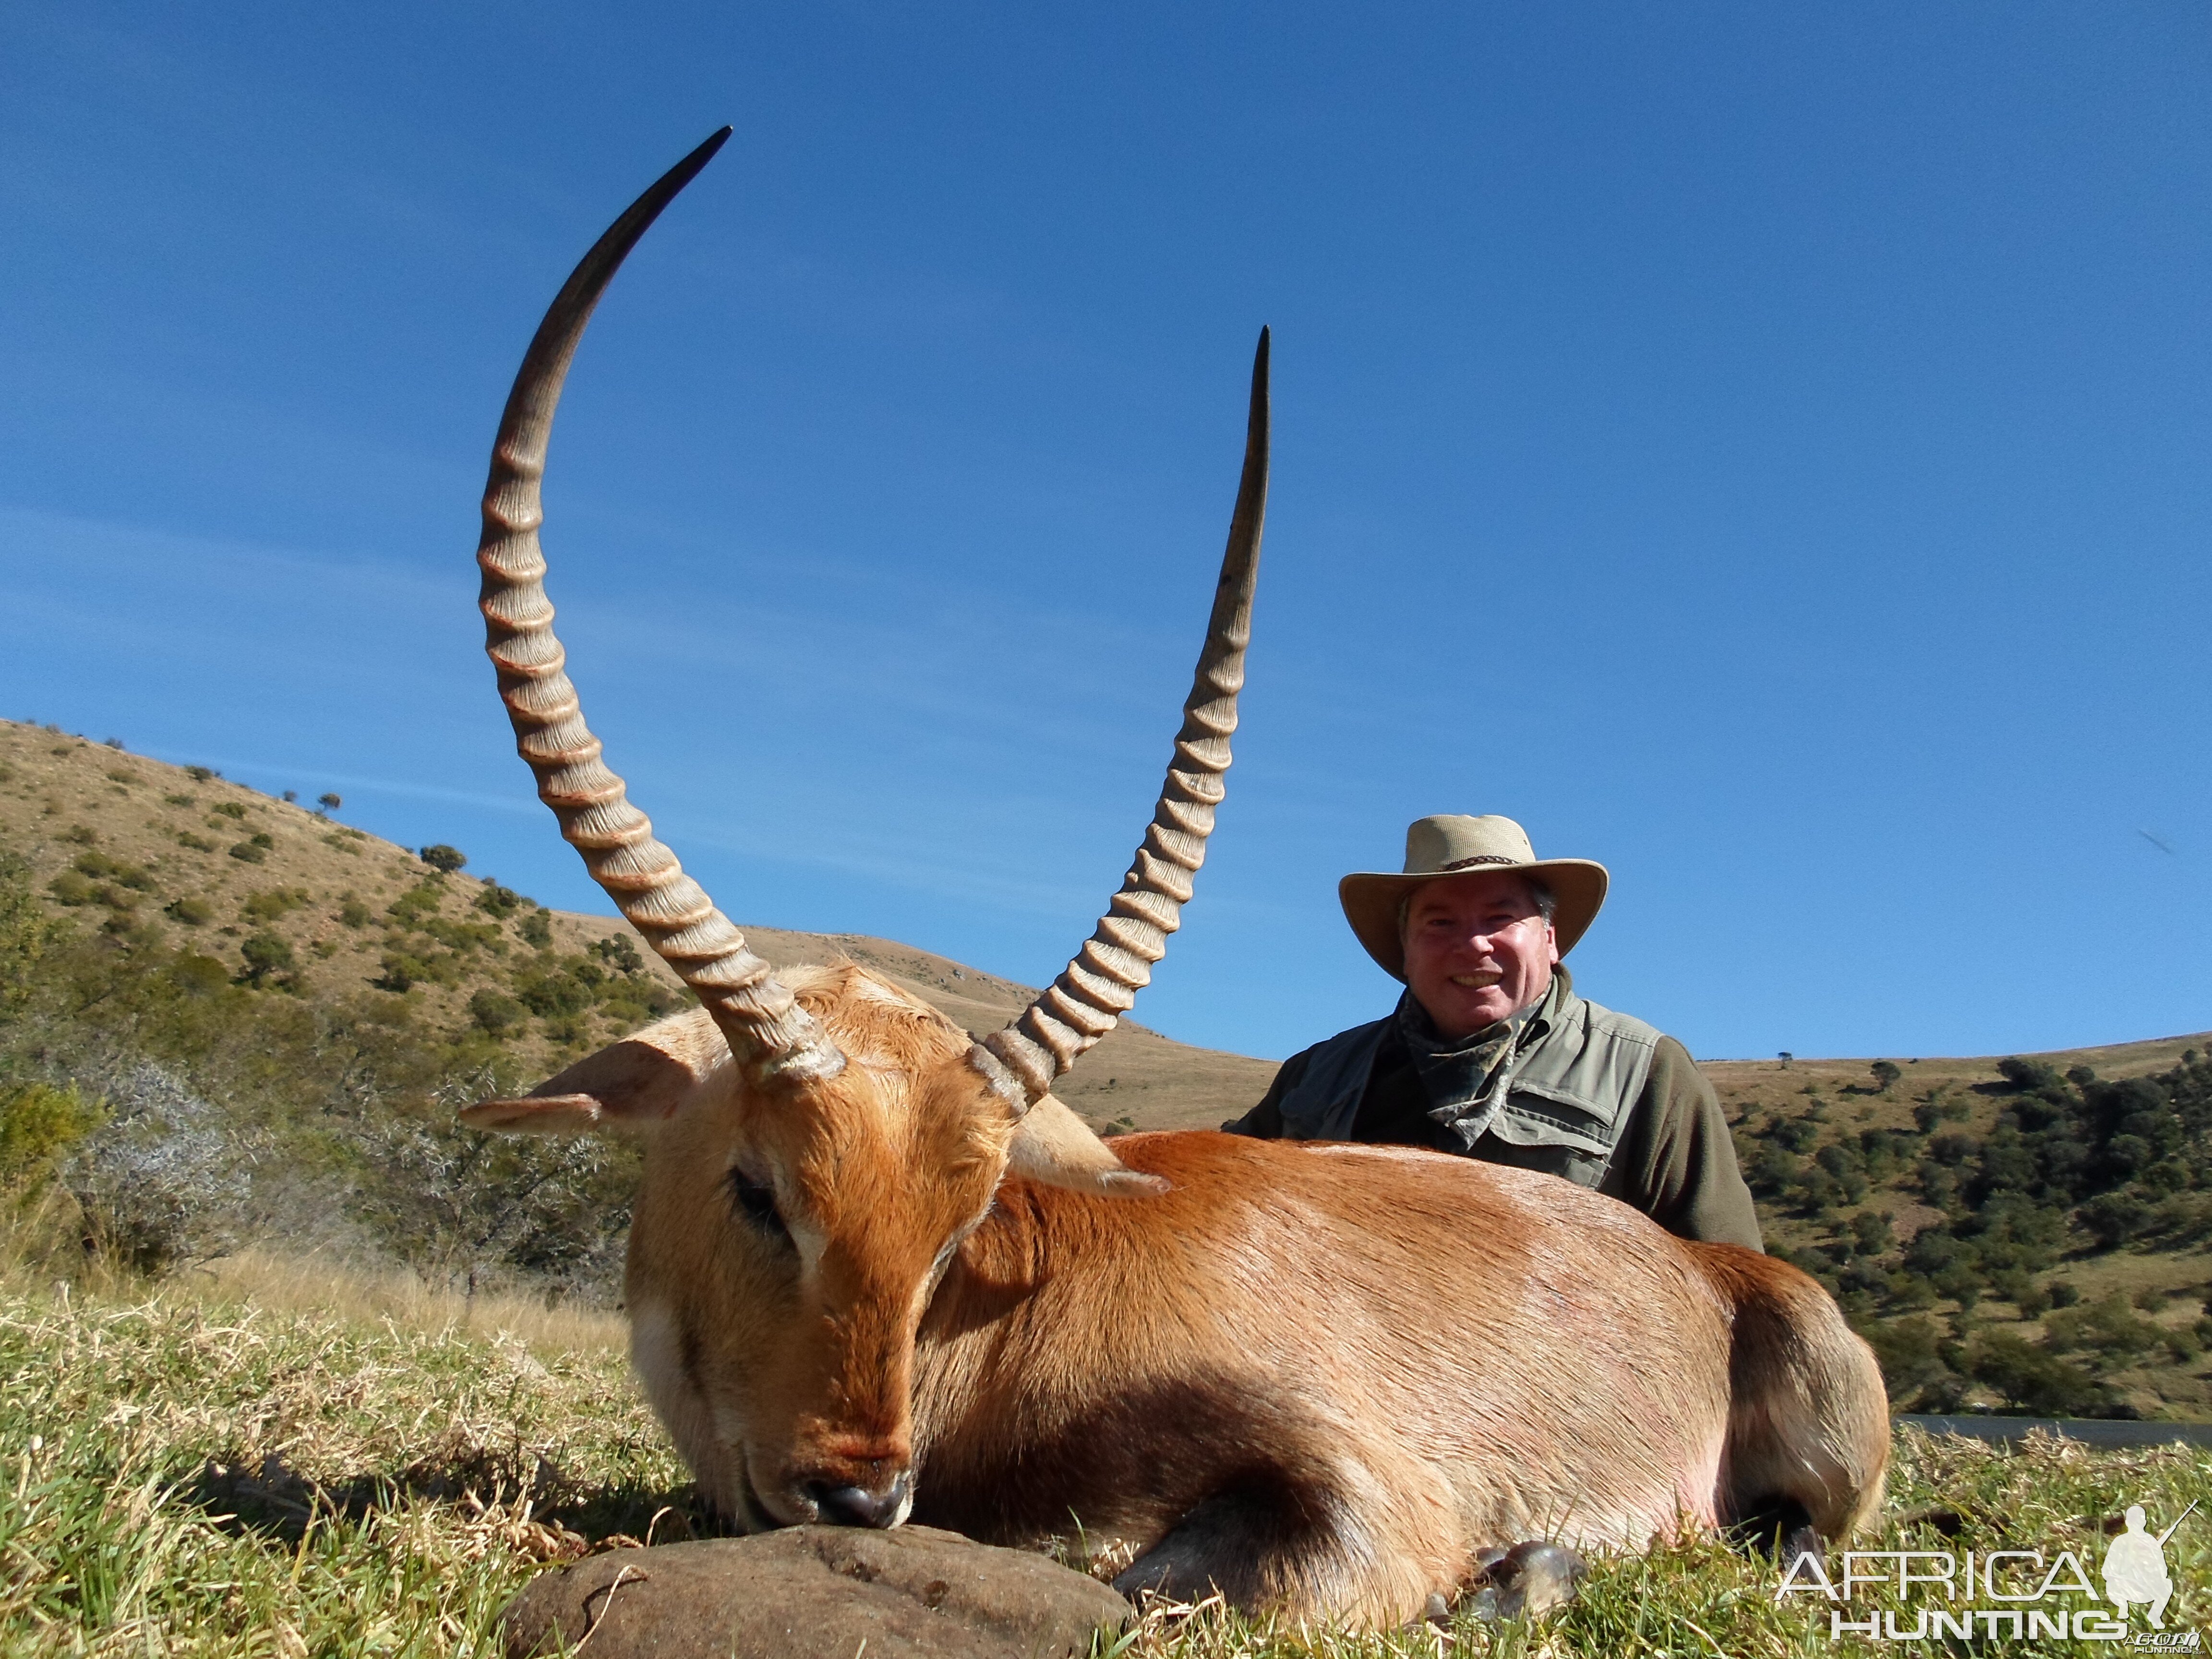 Michael J. Storinsky and his Red Lechwe